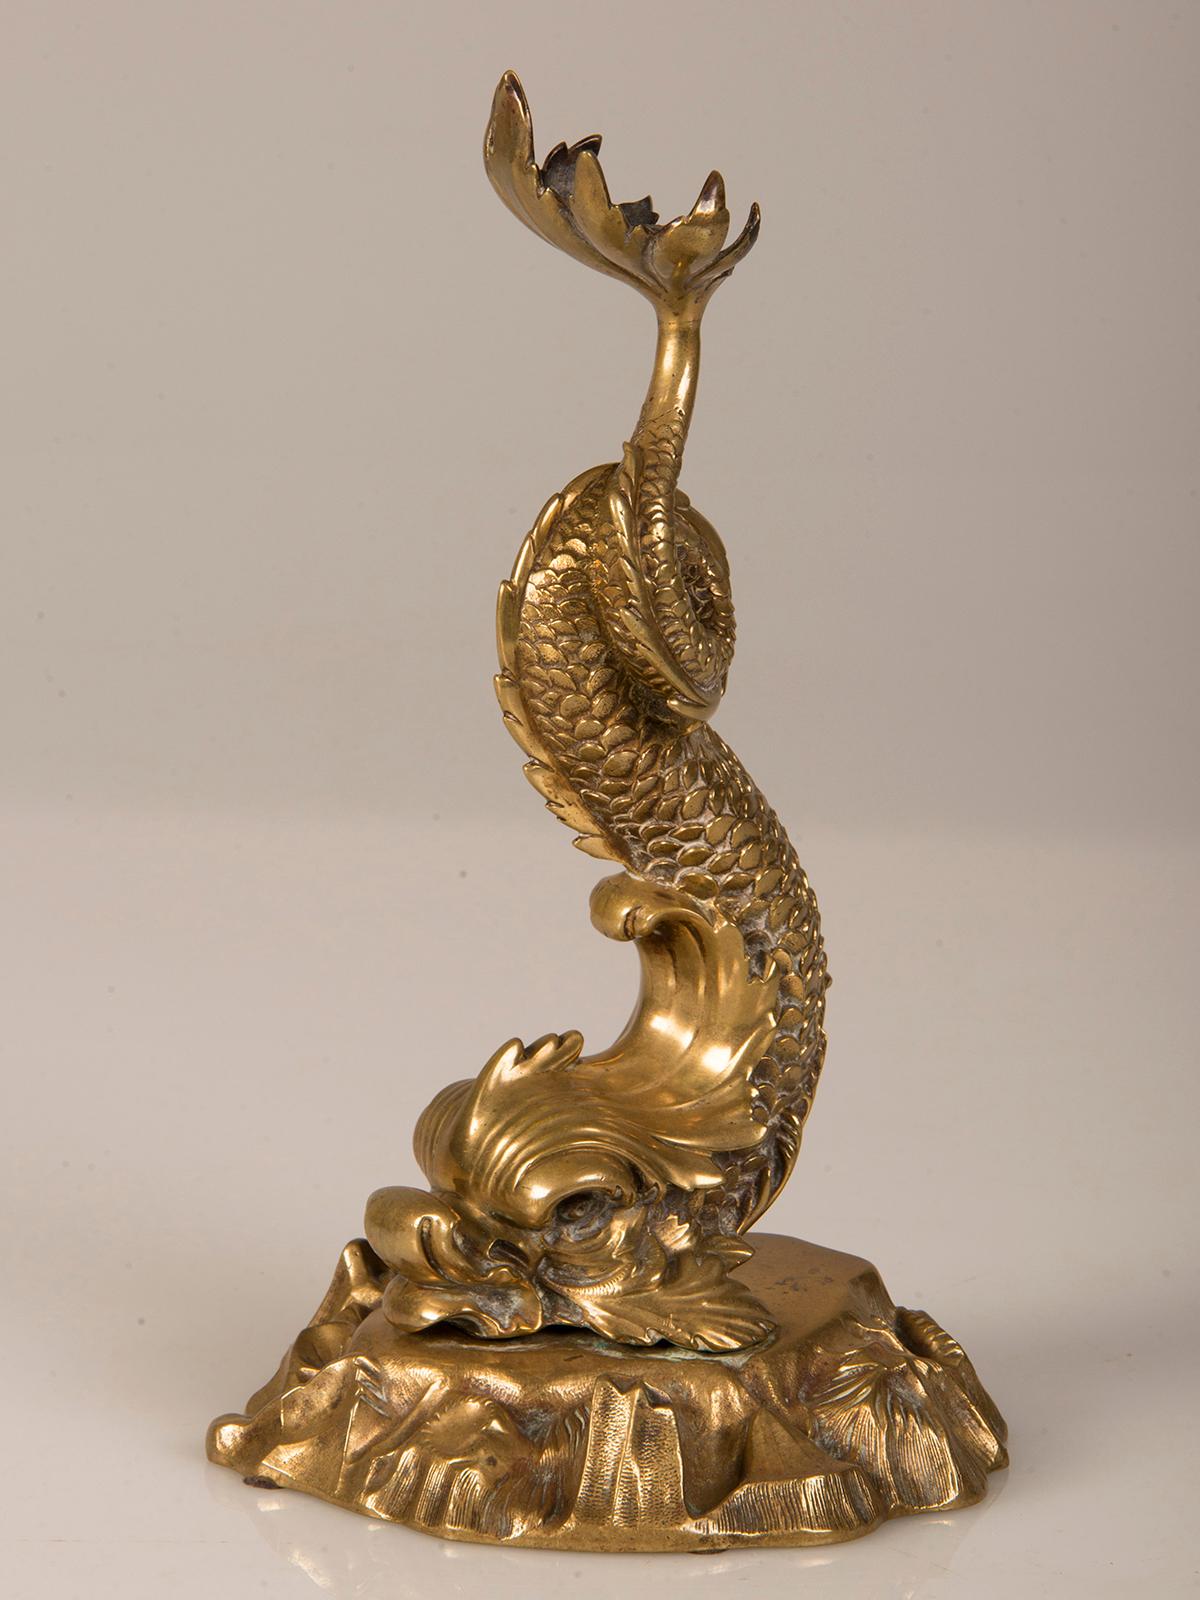 Antique Italian Brass Dolphin Sculpture from Italy, circa 1875 In Good Condition For Sale In Houston, TX